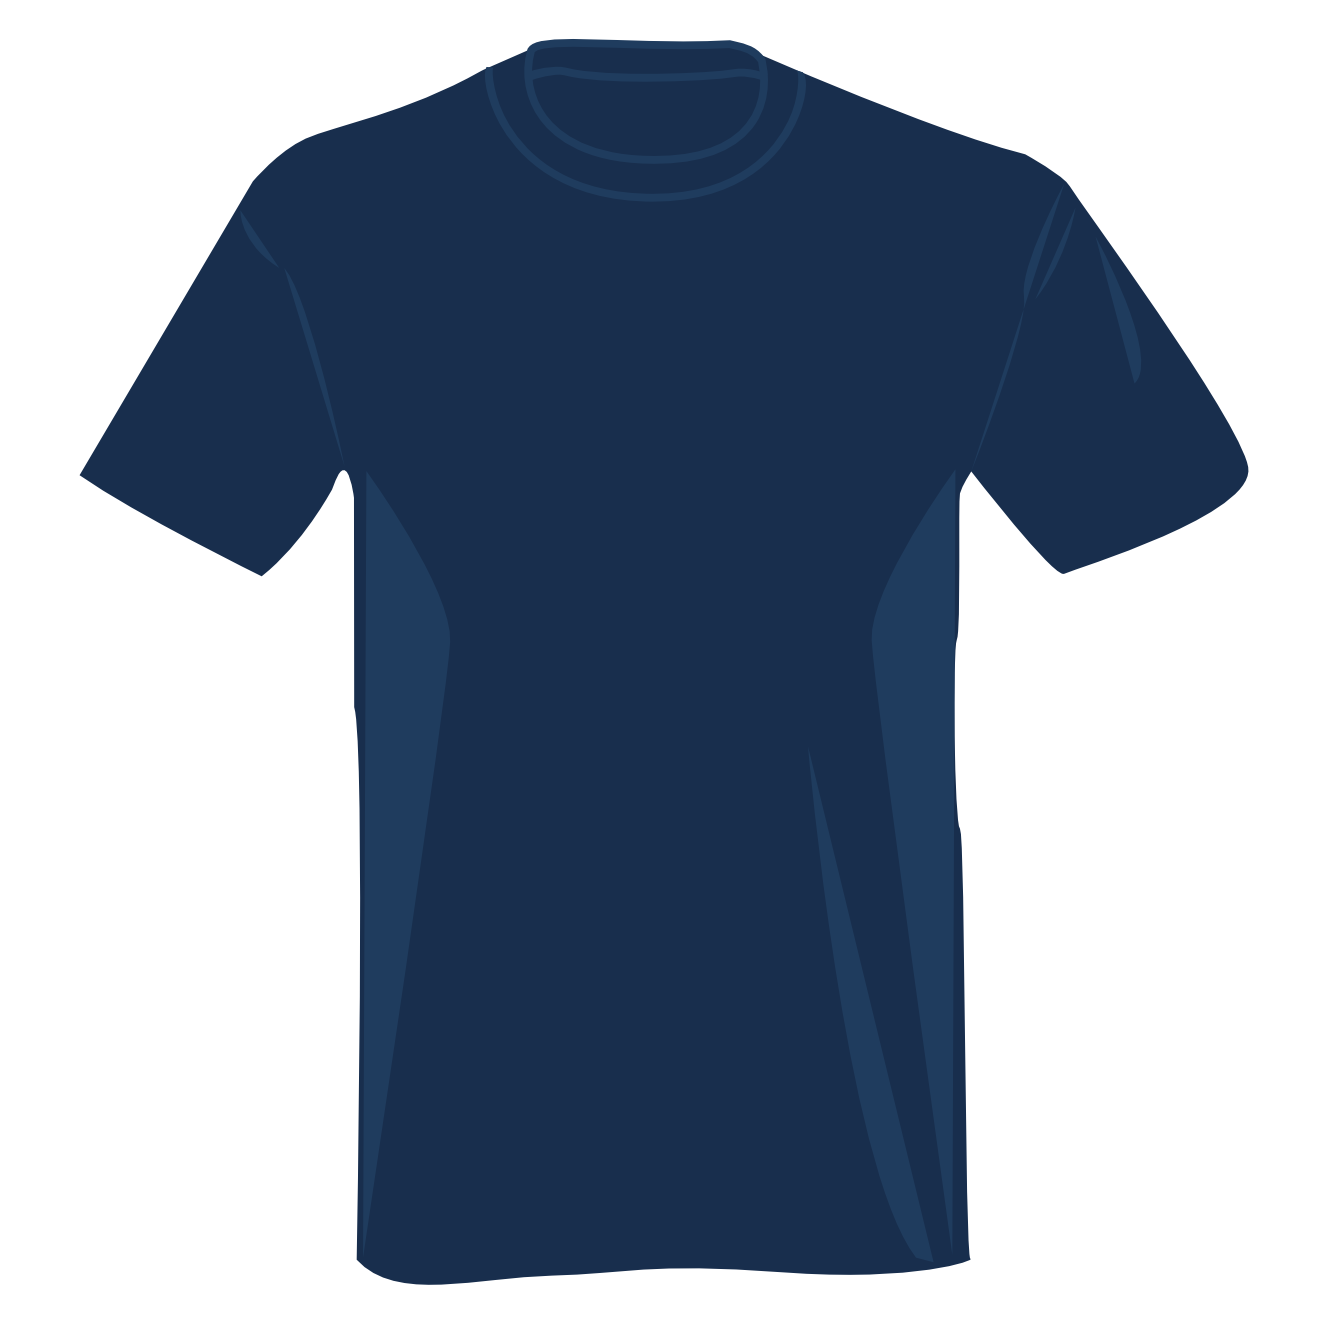 Free T Shirt Clip Art Download Free T Shirt Clip Art Png Images Free Cliparts On Clipart Library